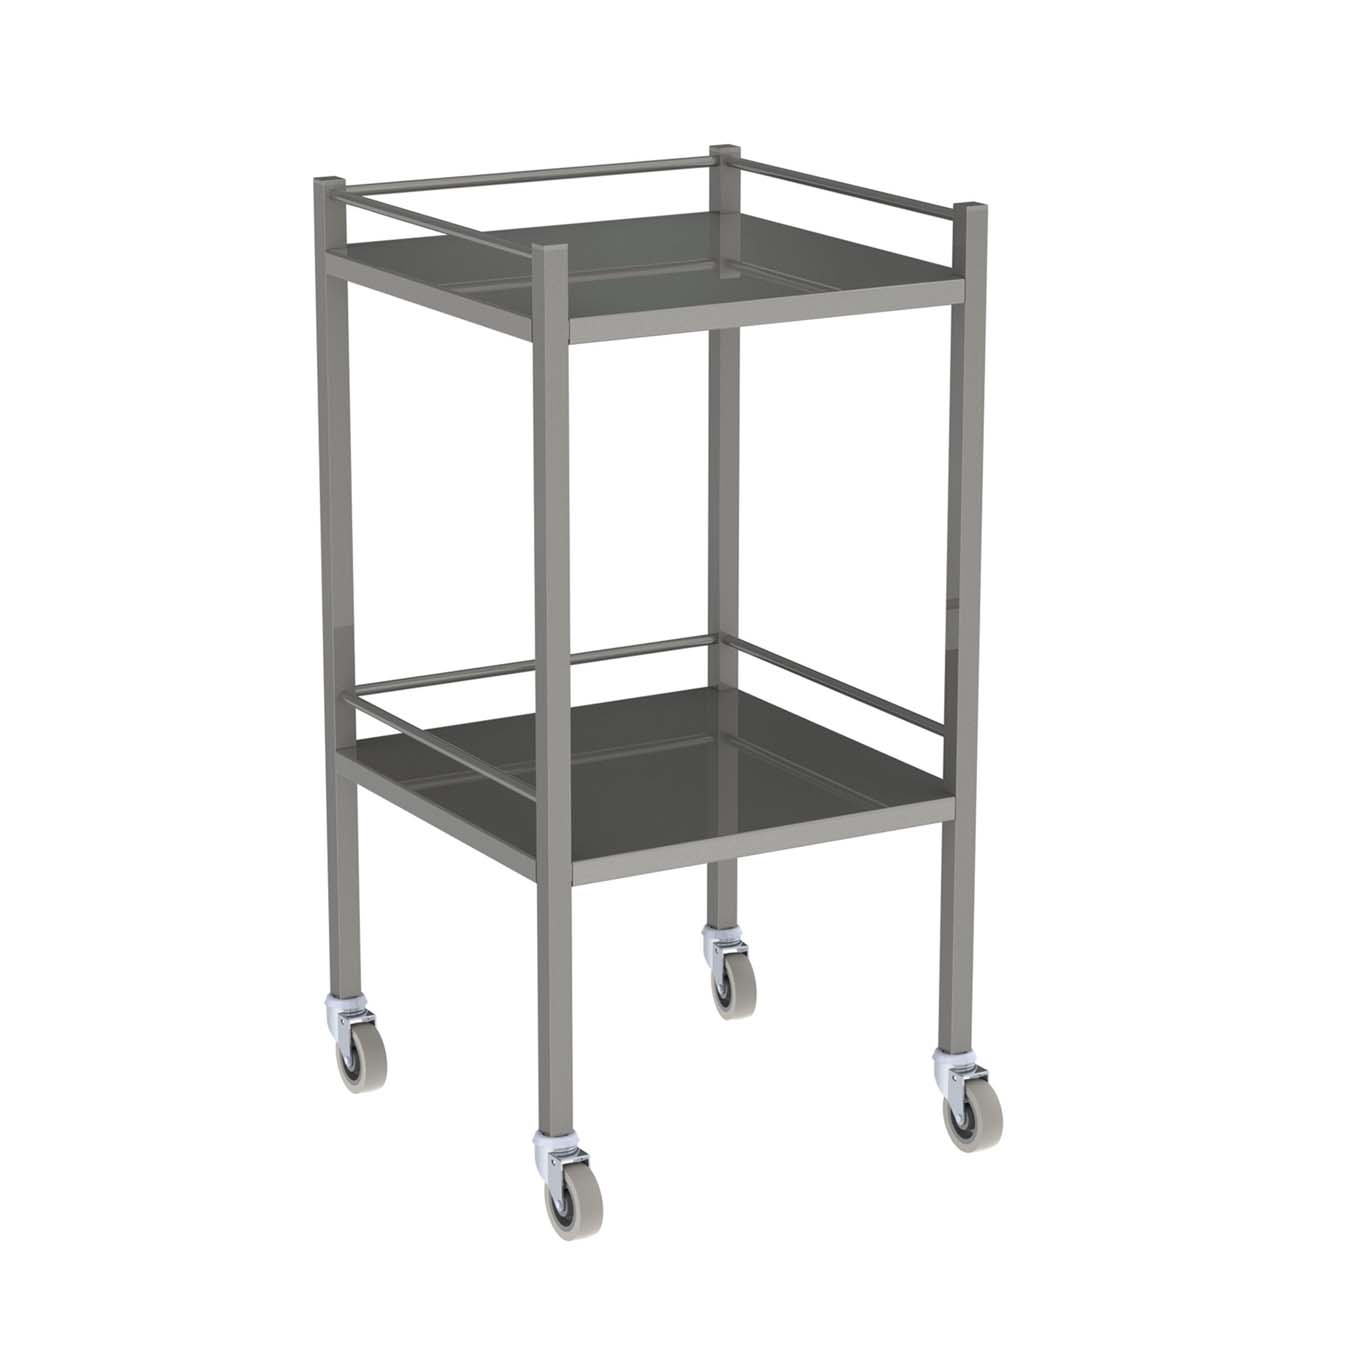 AX033_1_Dressing-Trolley-With-Rail-Stainless-Steel_490x490x900mm_1